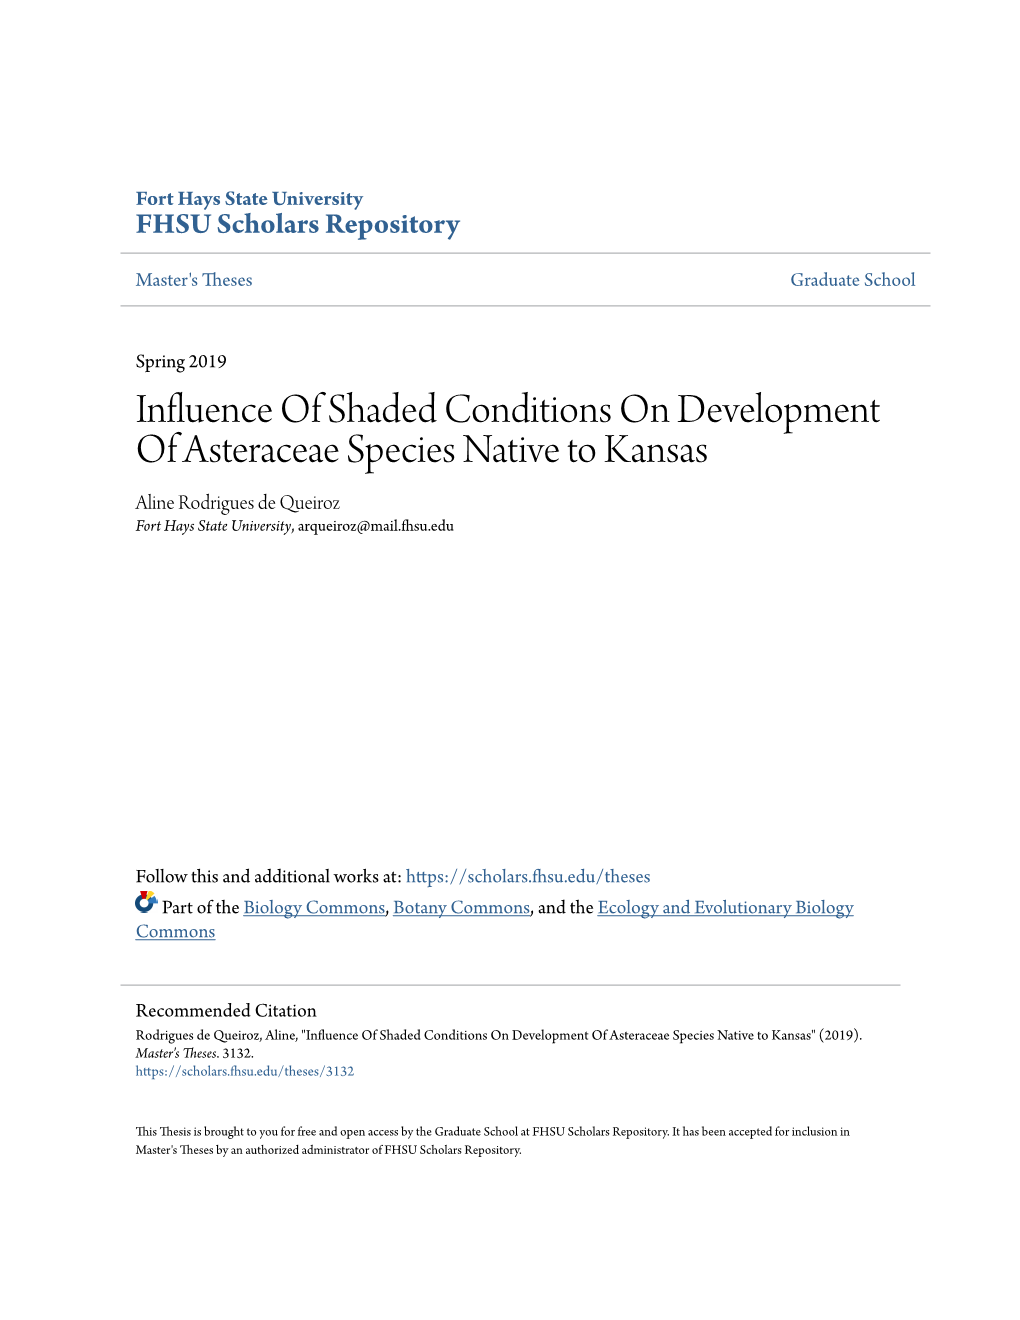 Influence of Shaded Conditions on Development of Asteraceae Species Native to Kansas Aline Rodrigues De Queiroz Fort Hays State University, Arqueiroz@Mail.Fhsu.Edu